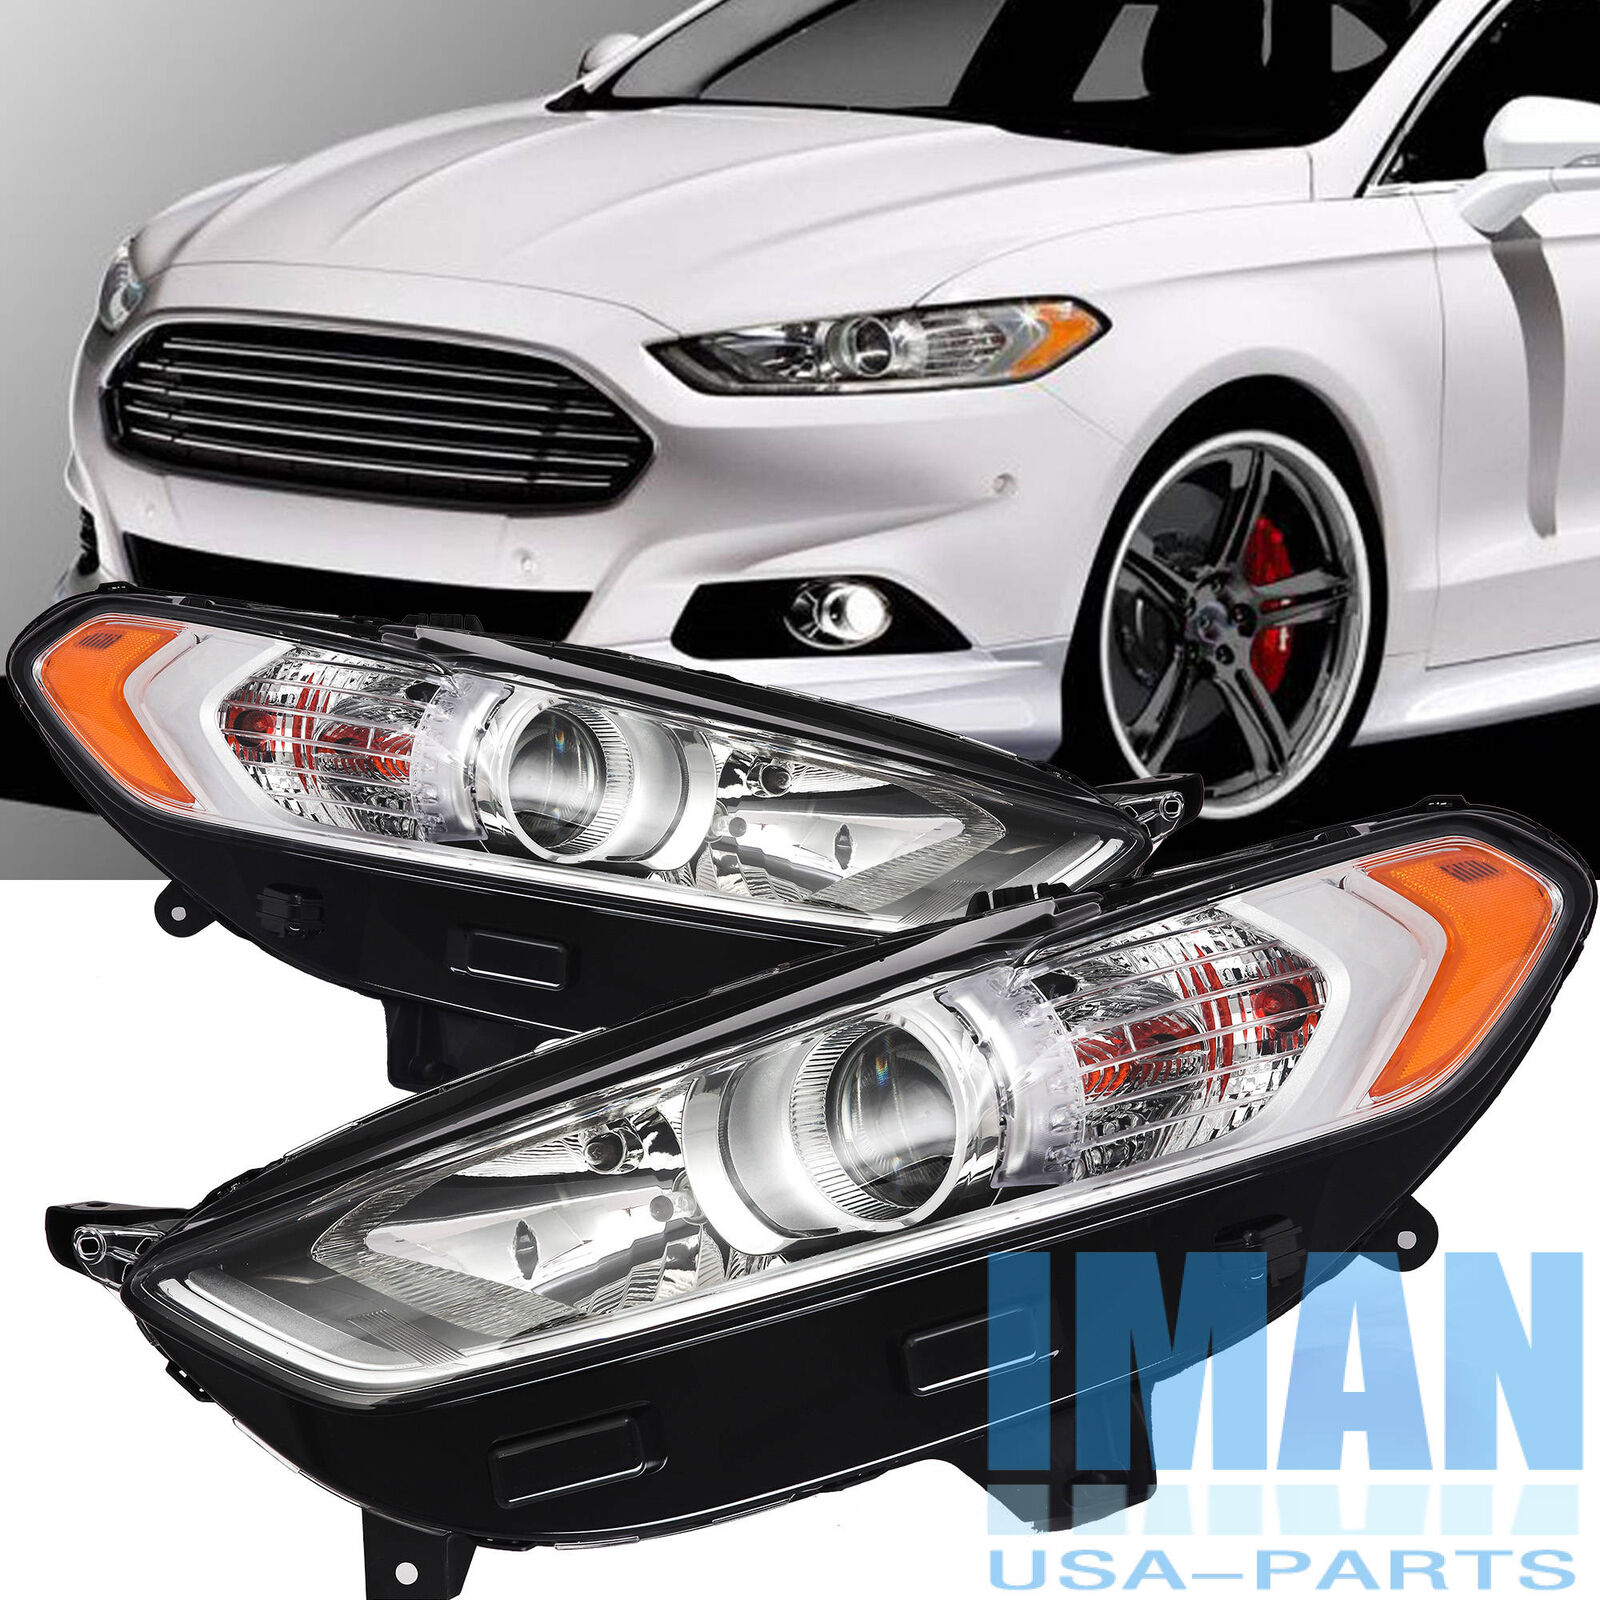 Halogen Front Headlight Headlamps Light Lamp Pair Set For Ford Fusion 2013-2016